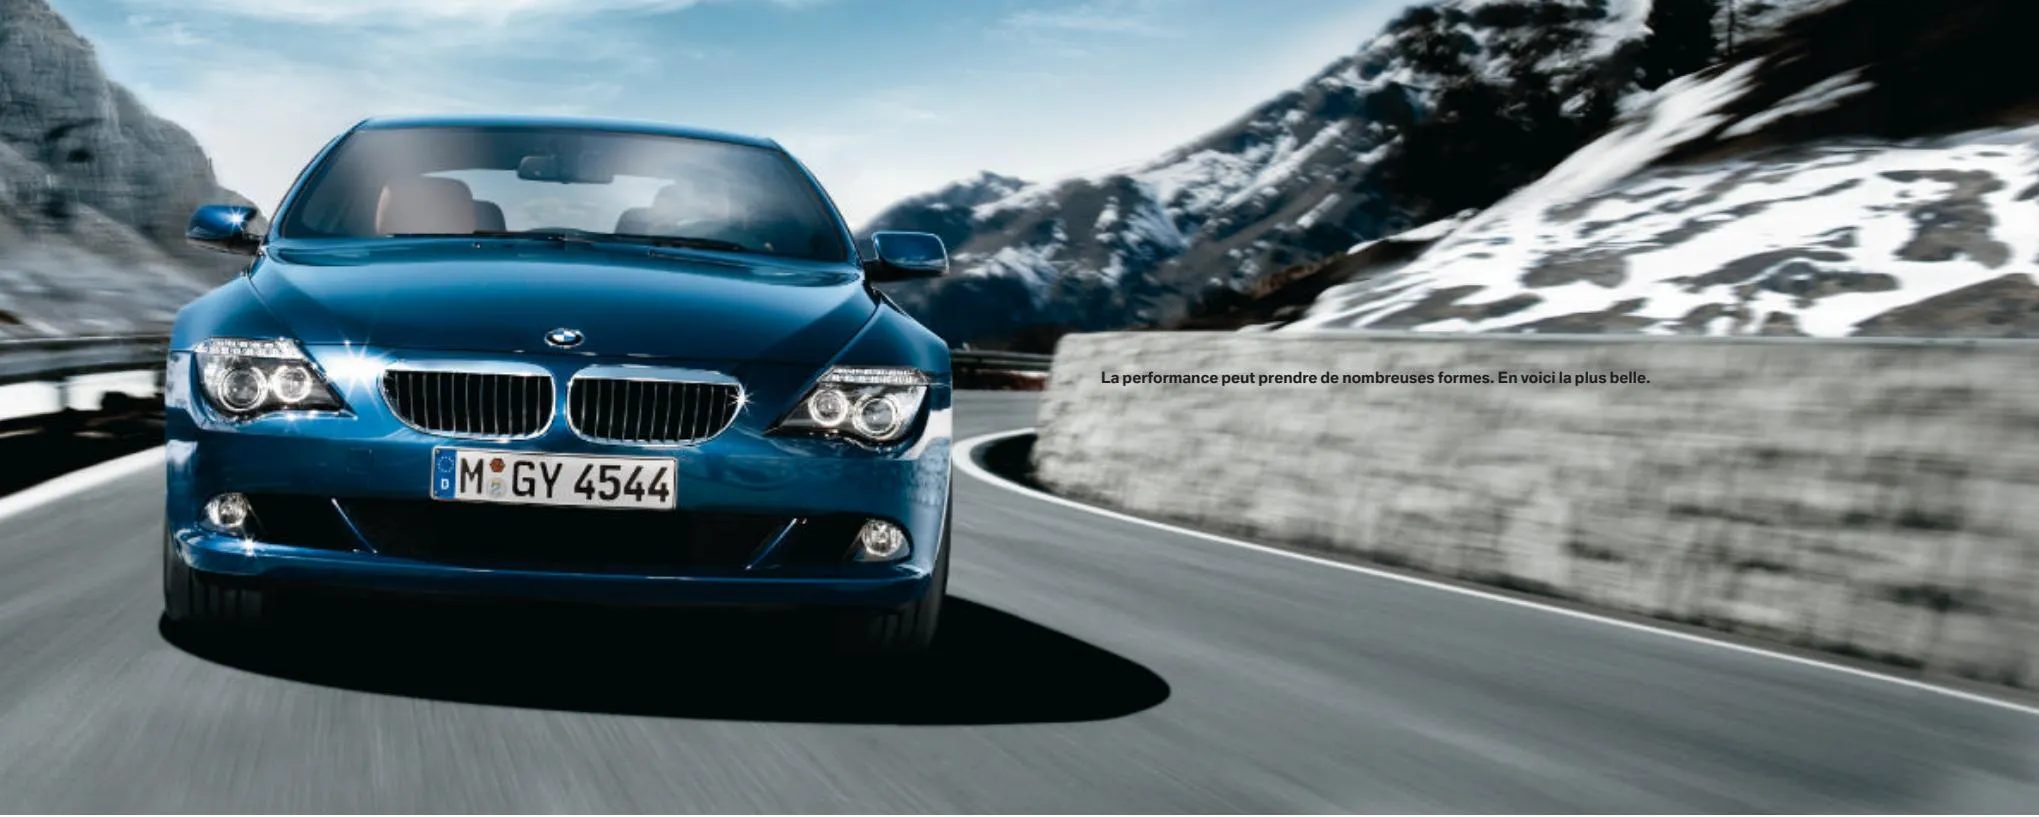 Catalogue BMW Serie6 CoupeCabriolet, page 00002